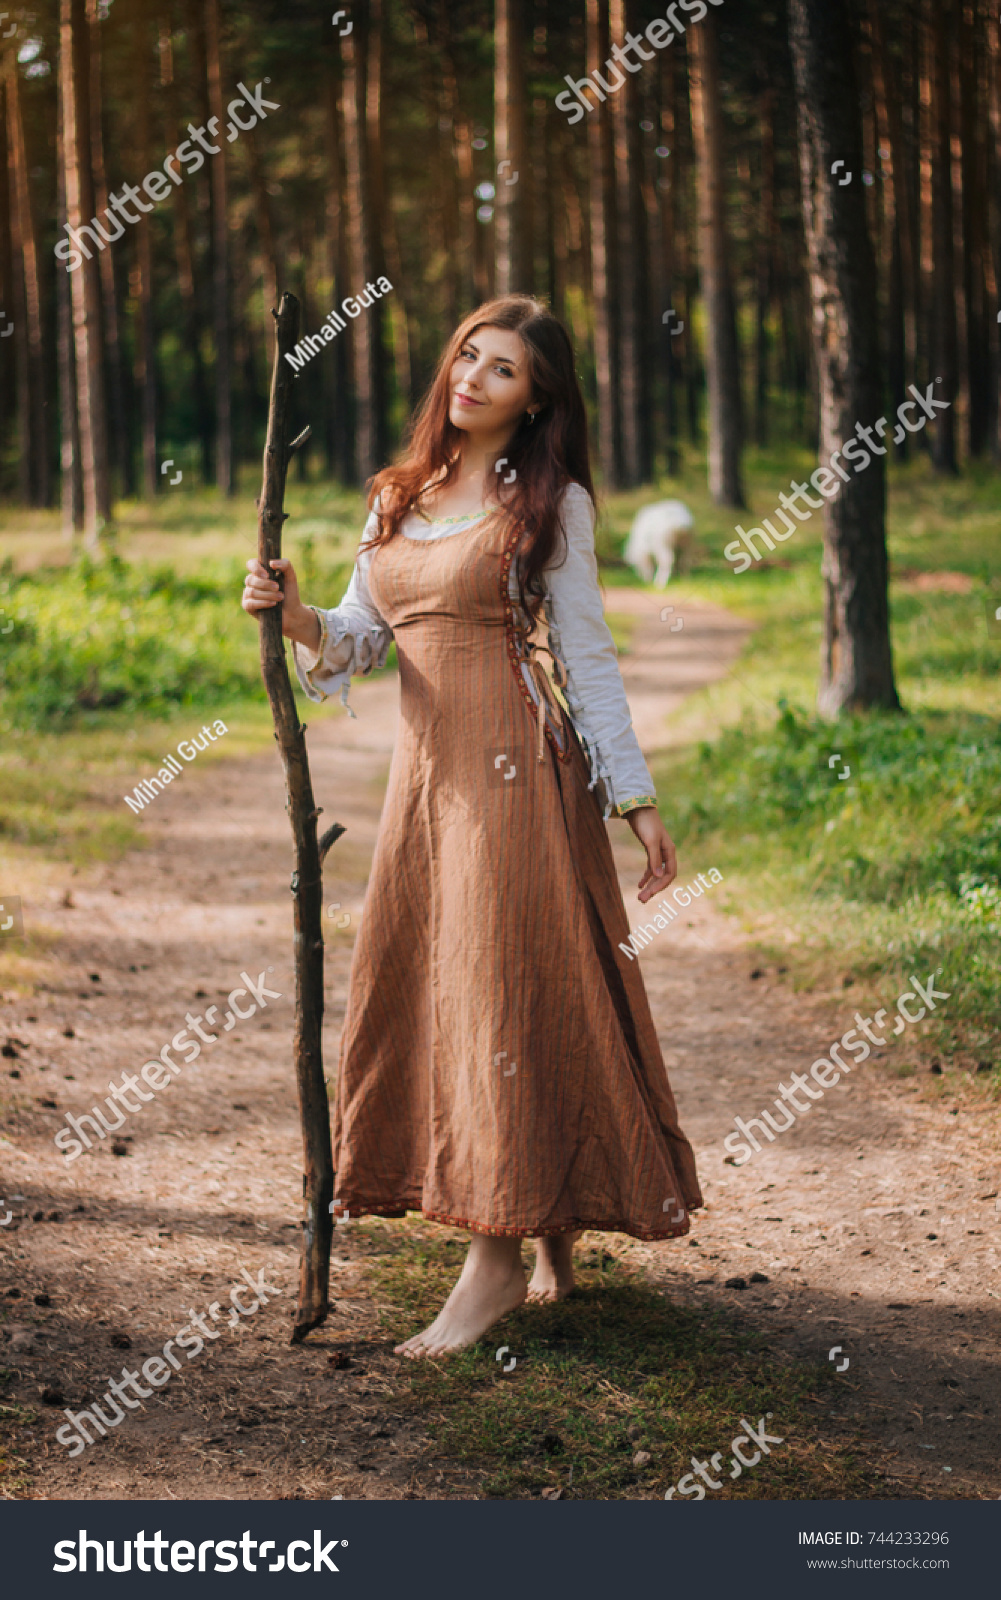 https://image.shutterstock.com/z/stock-photo-young-beautiful-girl-in-medieval-cowboy-clothes-with-a-stick-in-hand-barefoot-on-the-ground-744233296.jpg